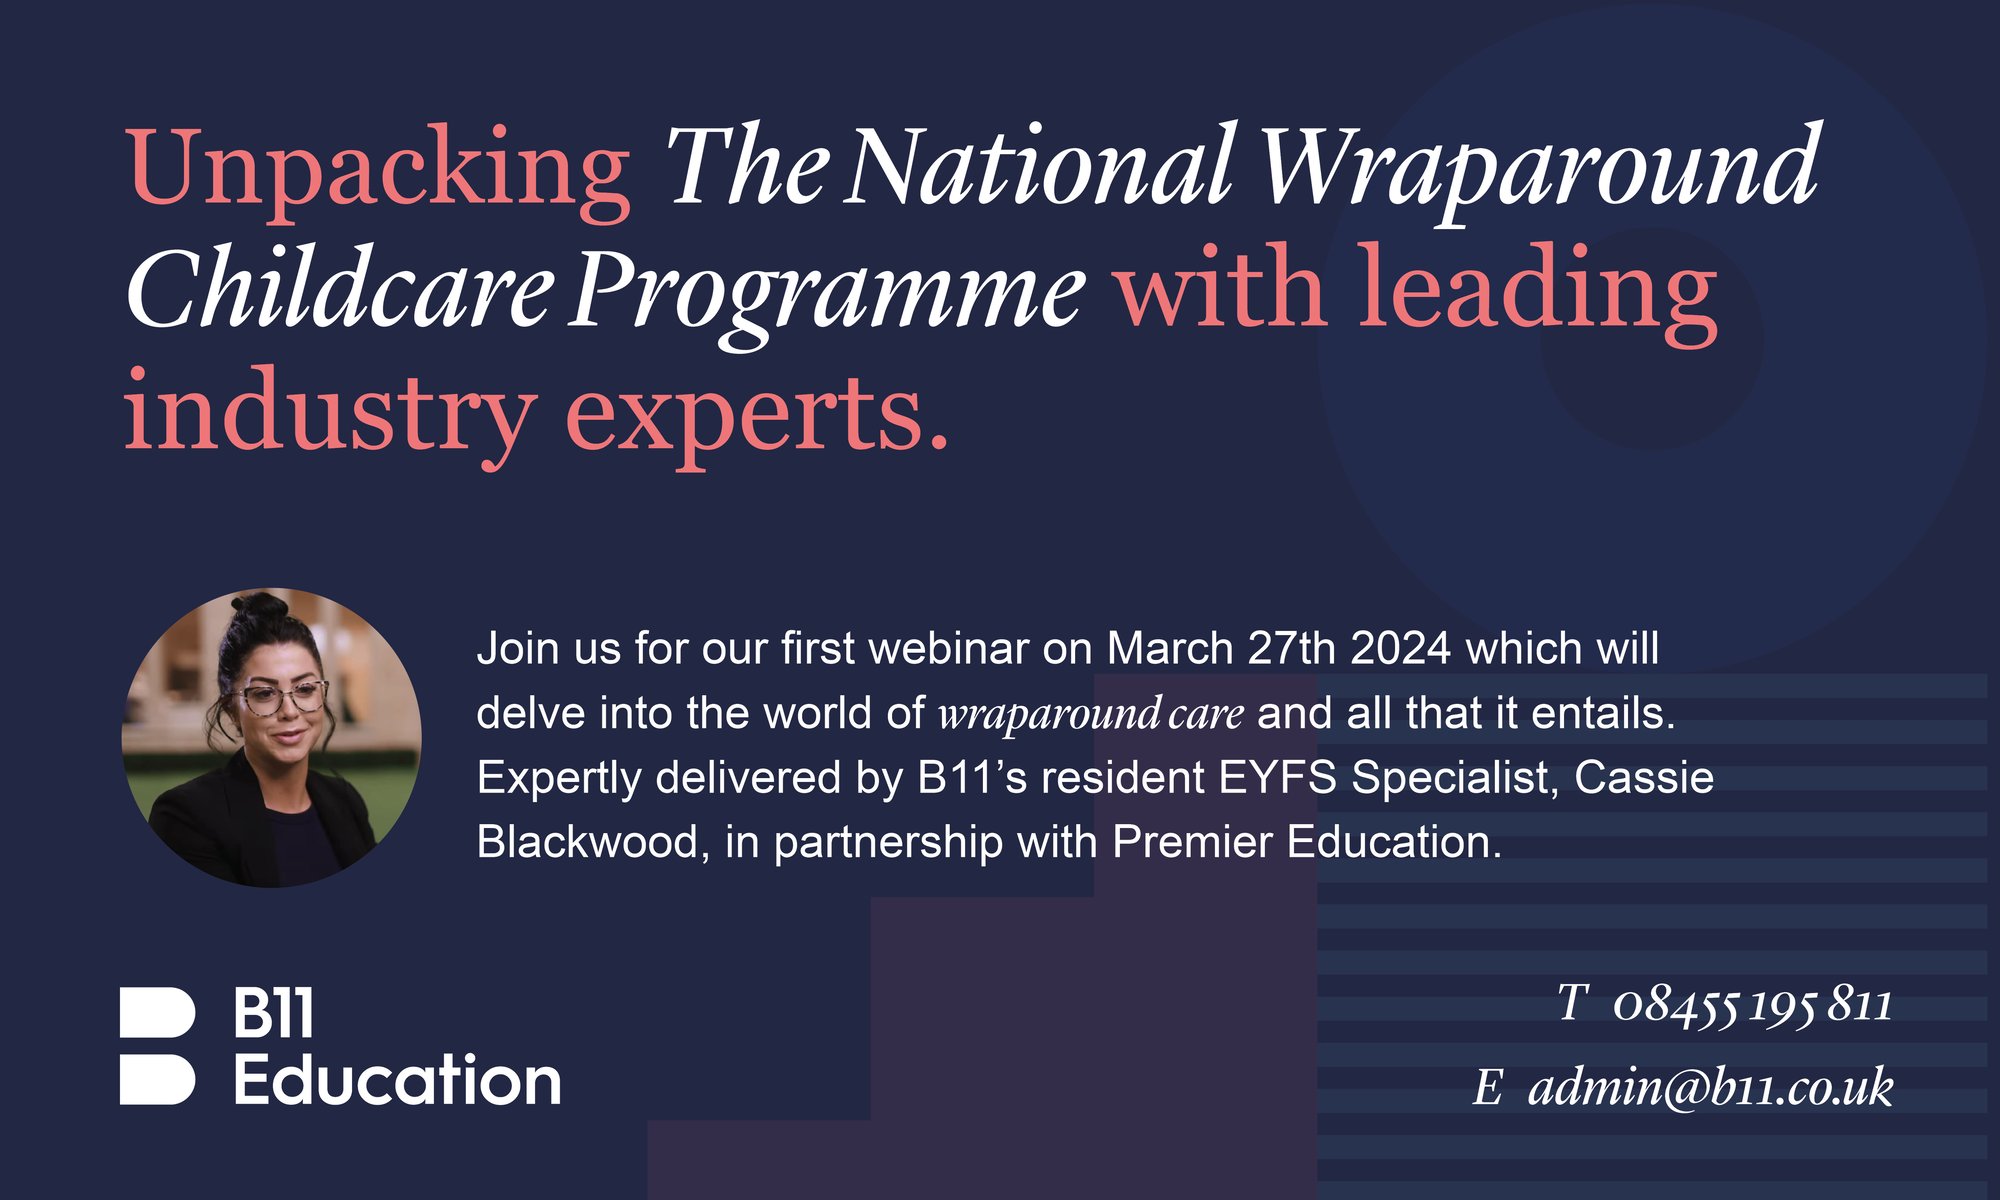 Join our National Wraparound Childcare Programme webinar